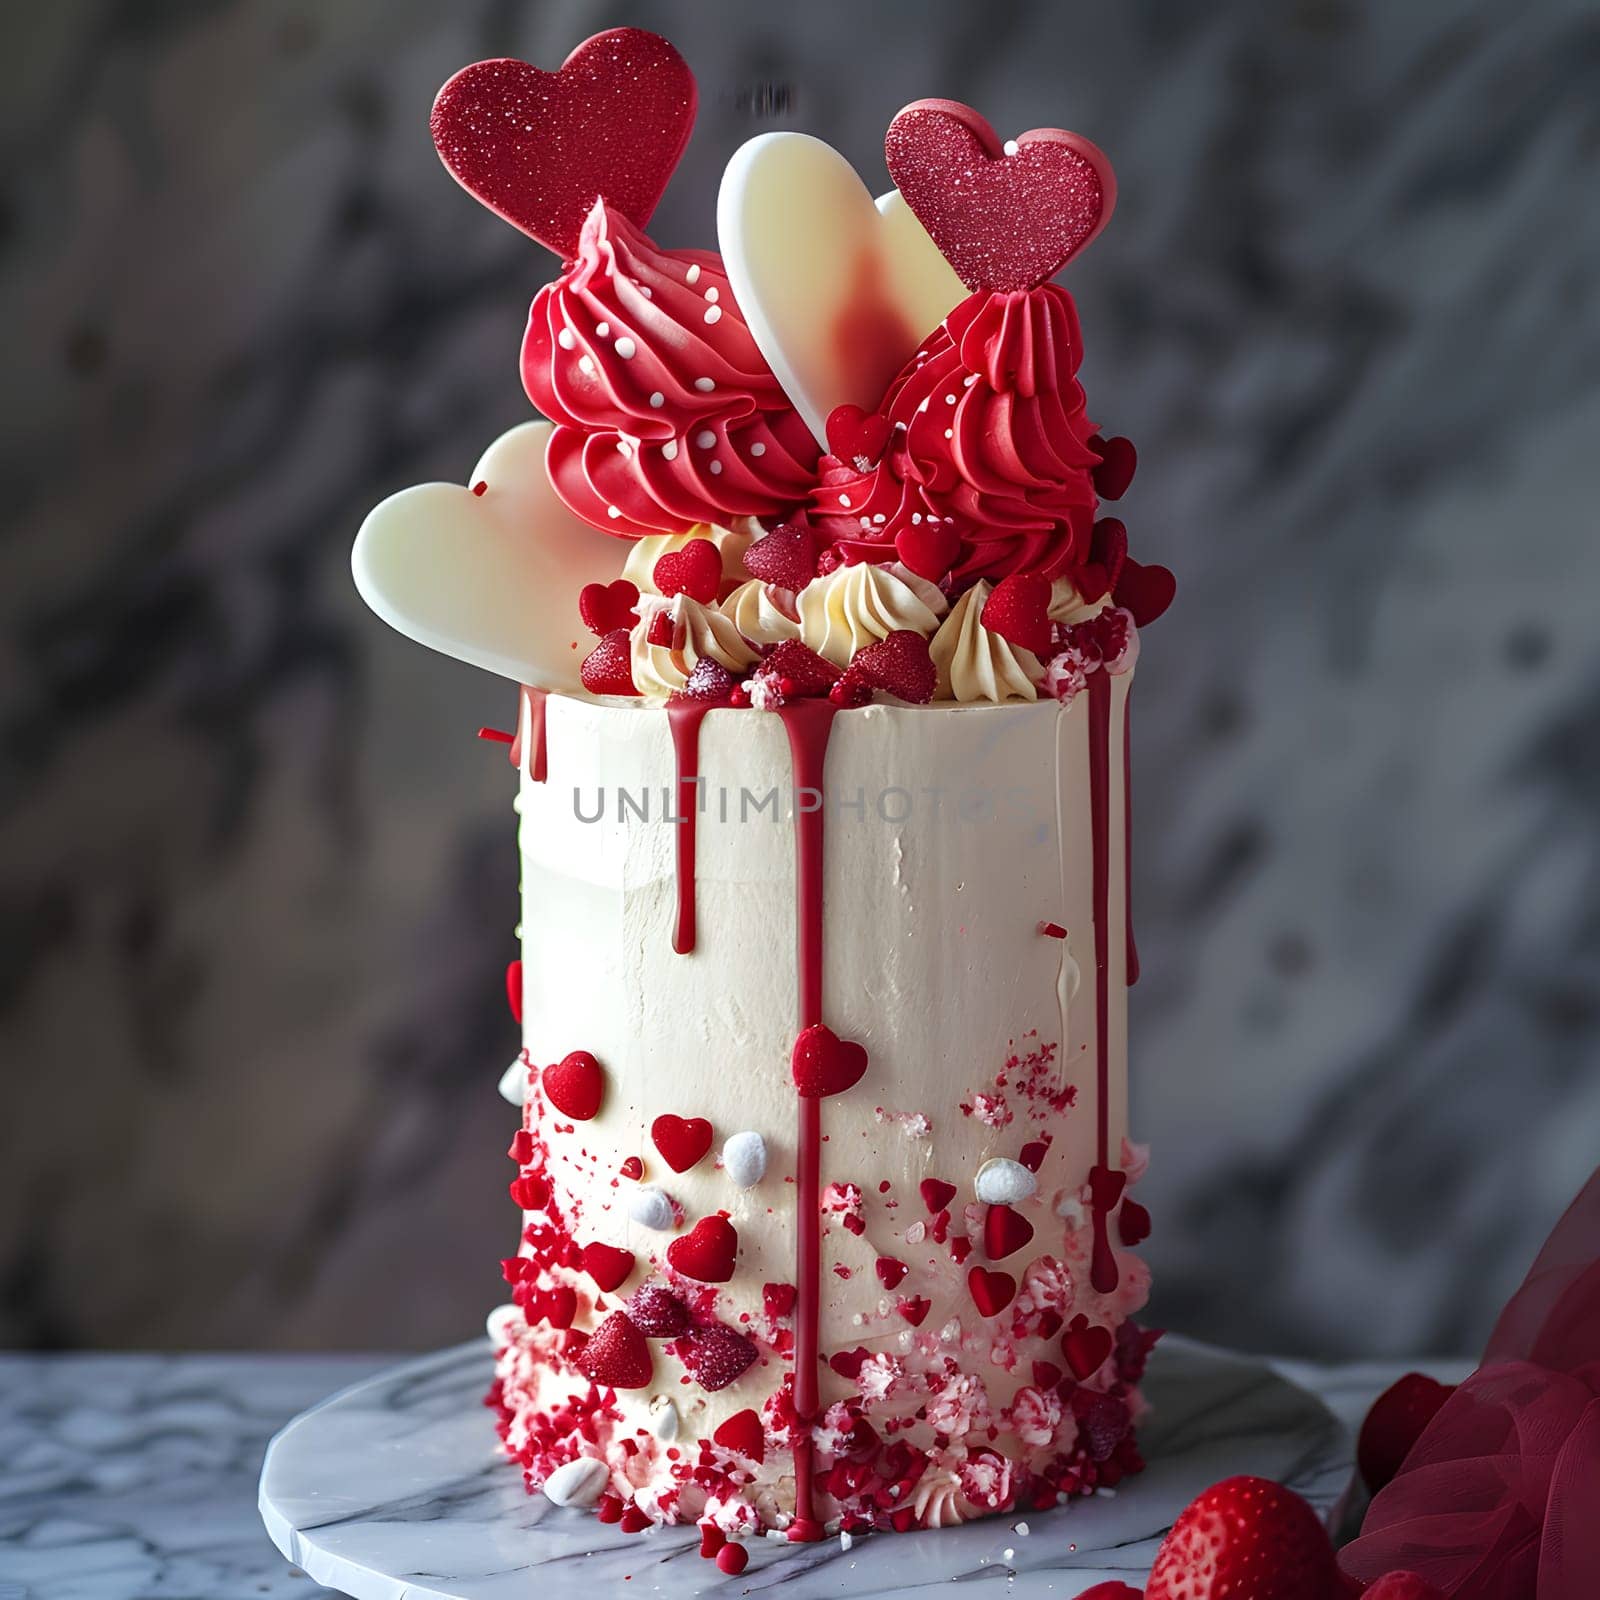 A sweet white sugar cake with vibrant red frosting and decorative heartshaped petals on top, perfect for adding a touch of romance to any occasion